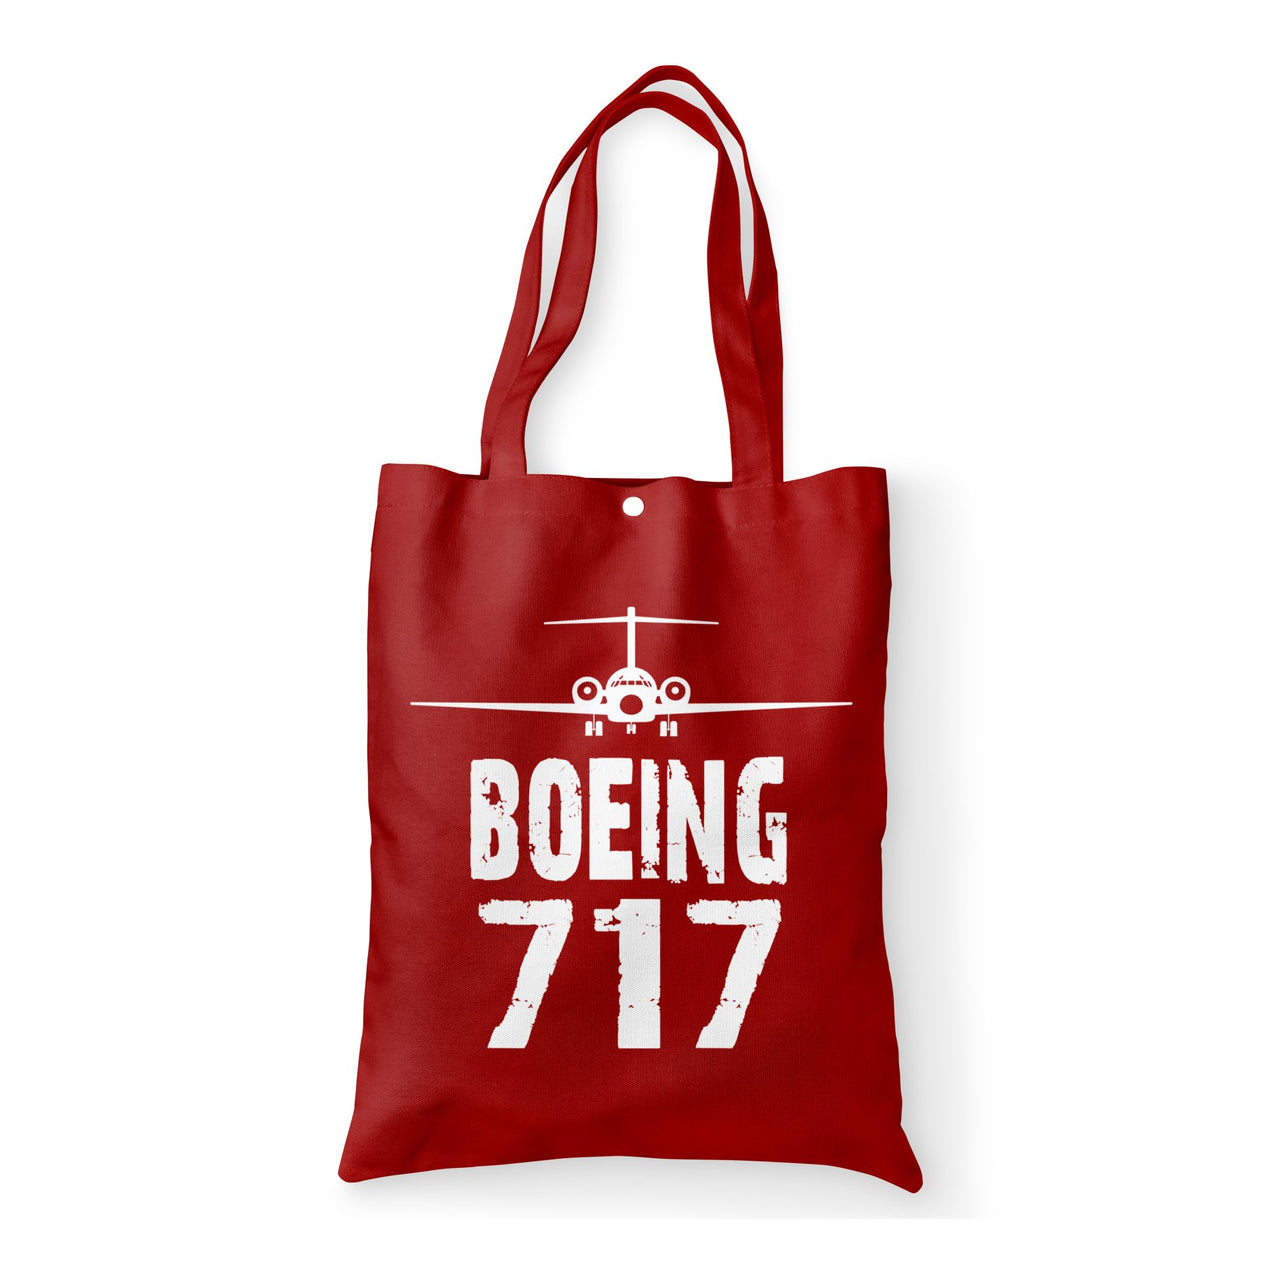 Boeing 717 & Plane Designed Tote Bags